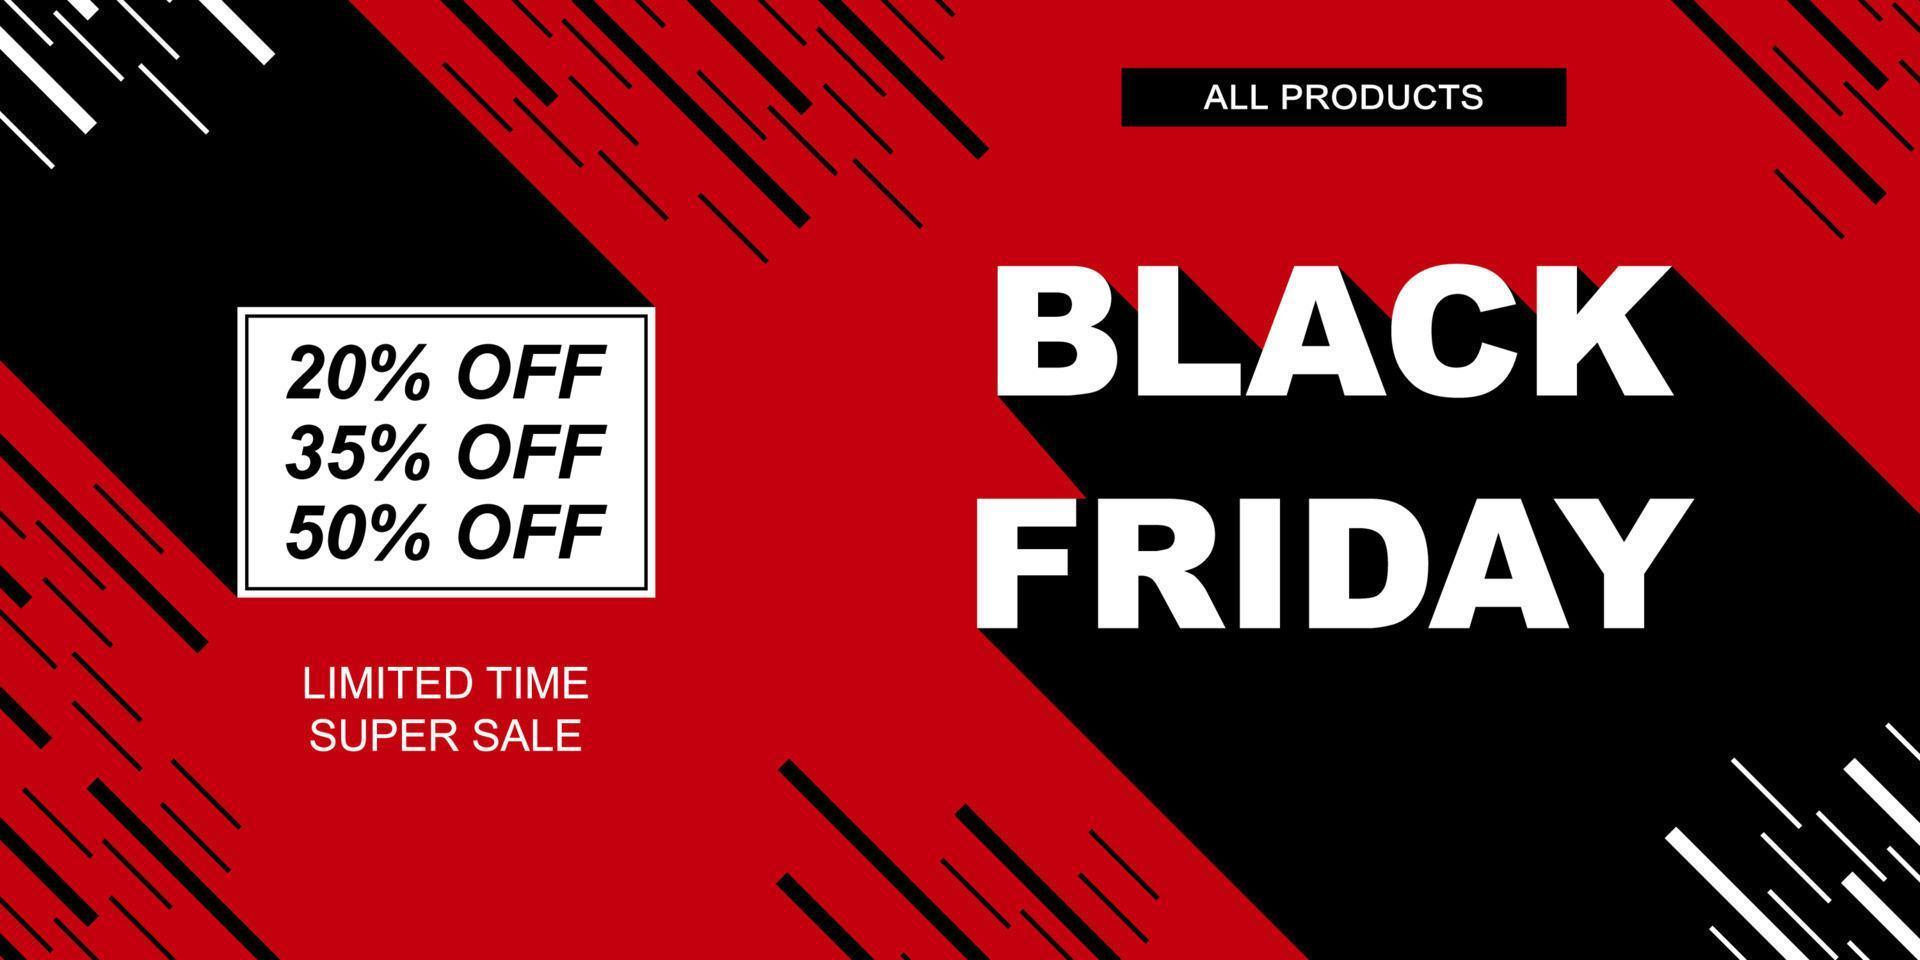 Black Friday sale vector banner. Red background with black stripes and text long shadow. Horizontal promo template.